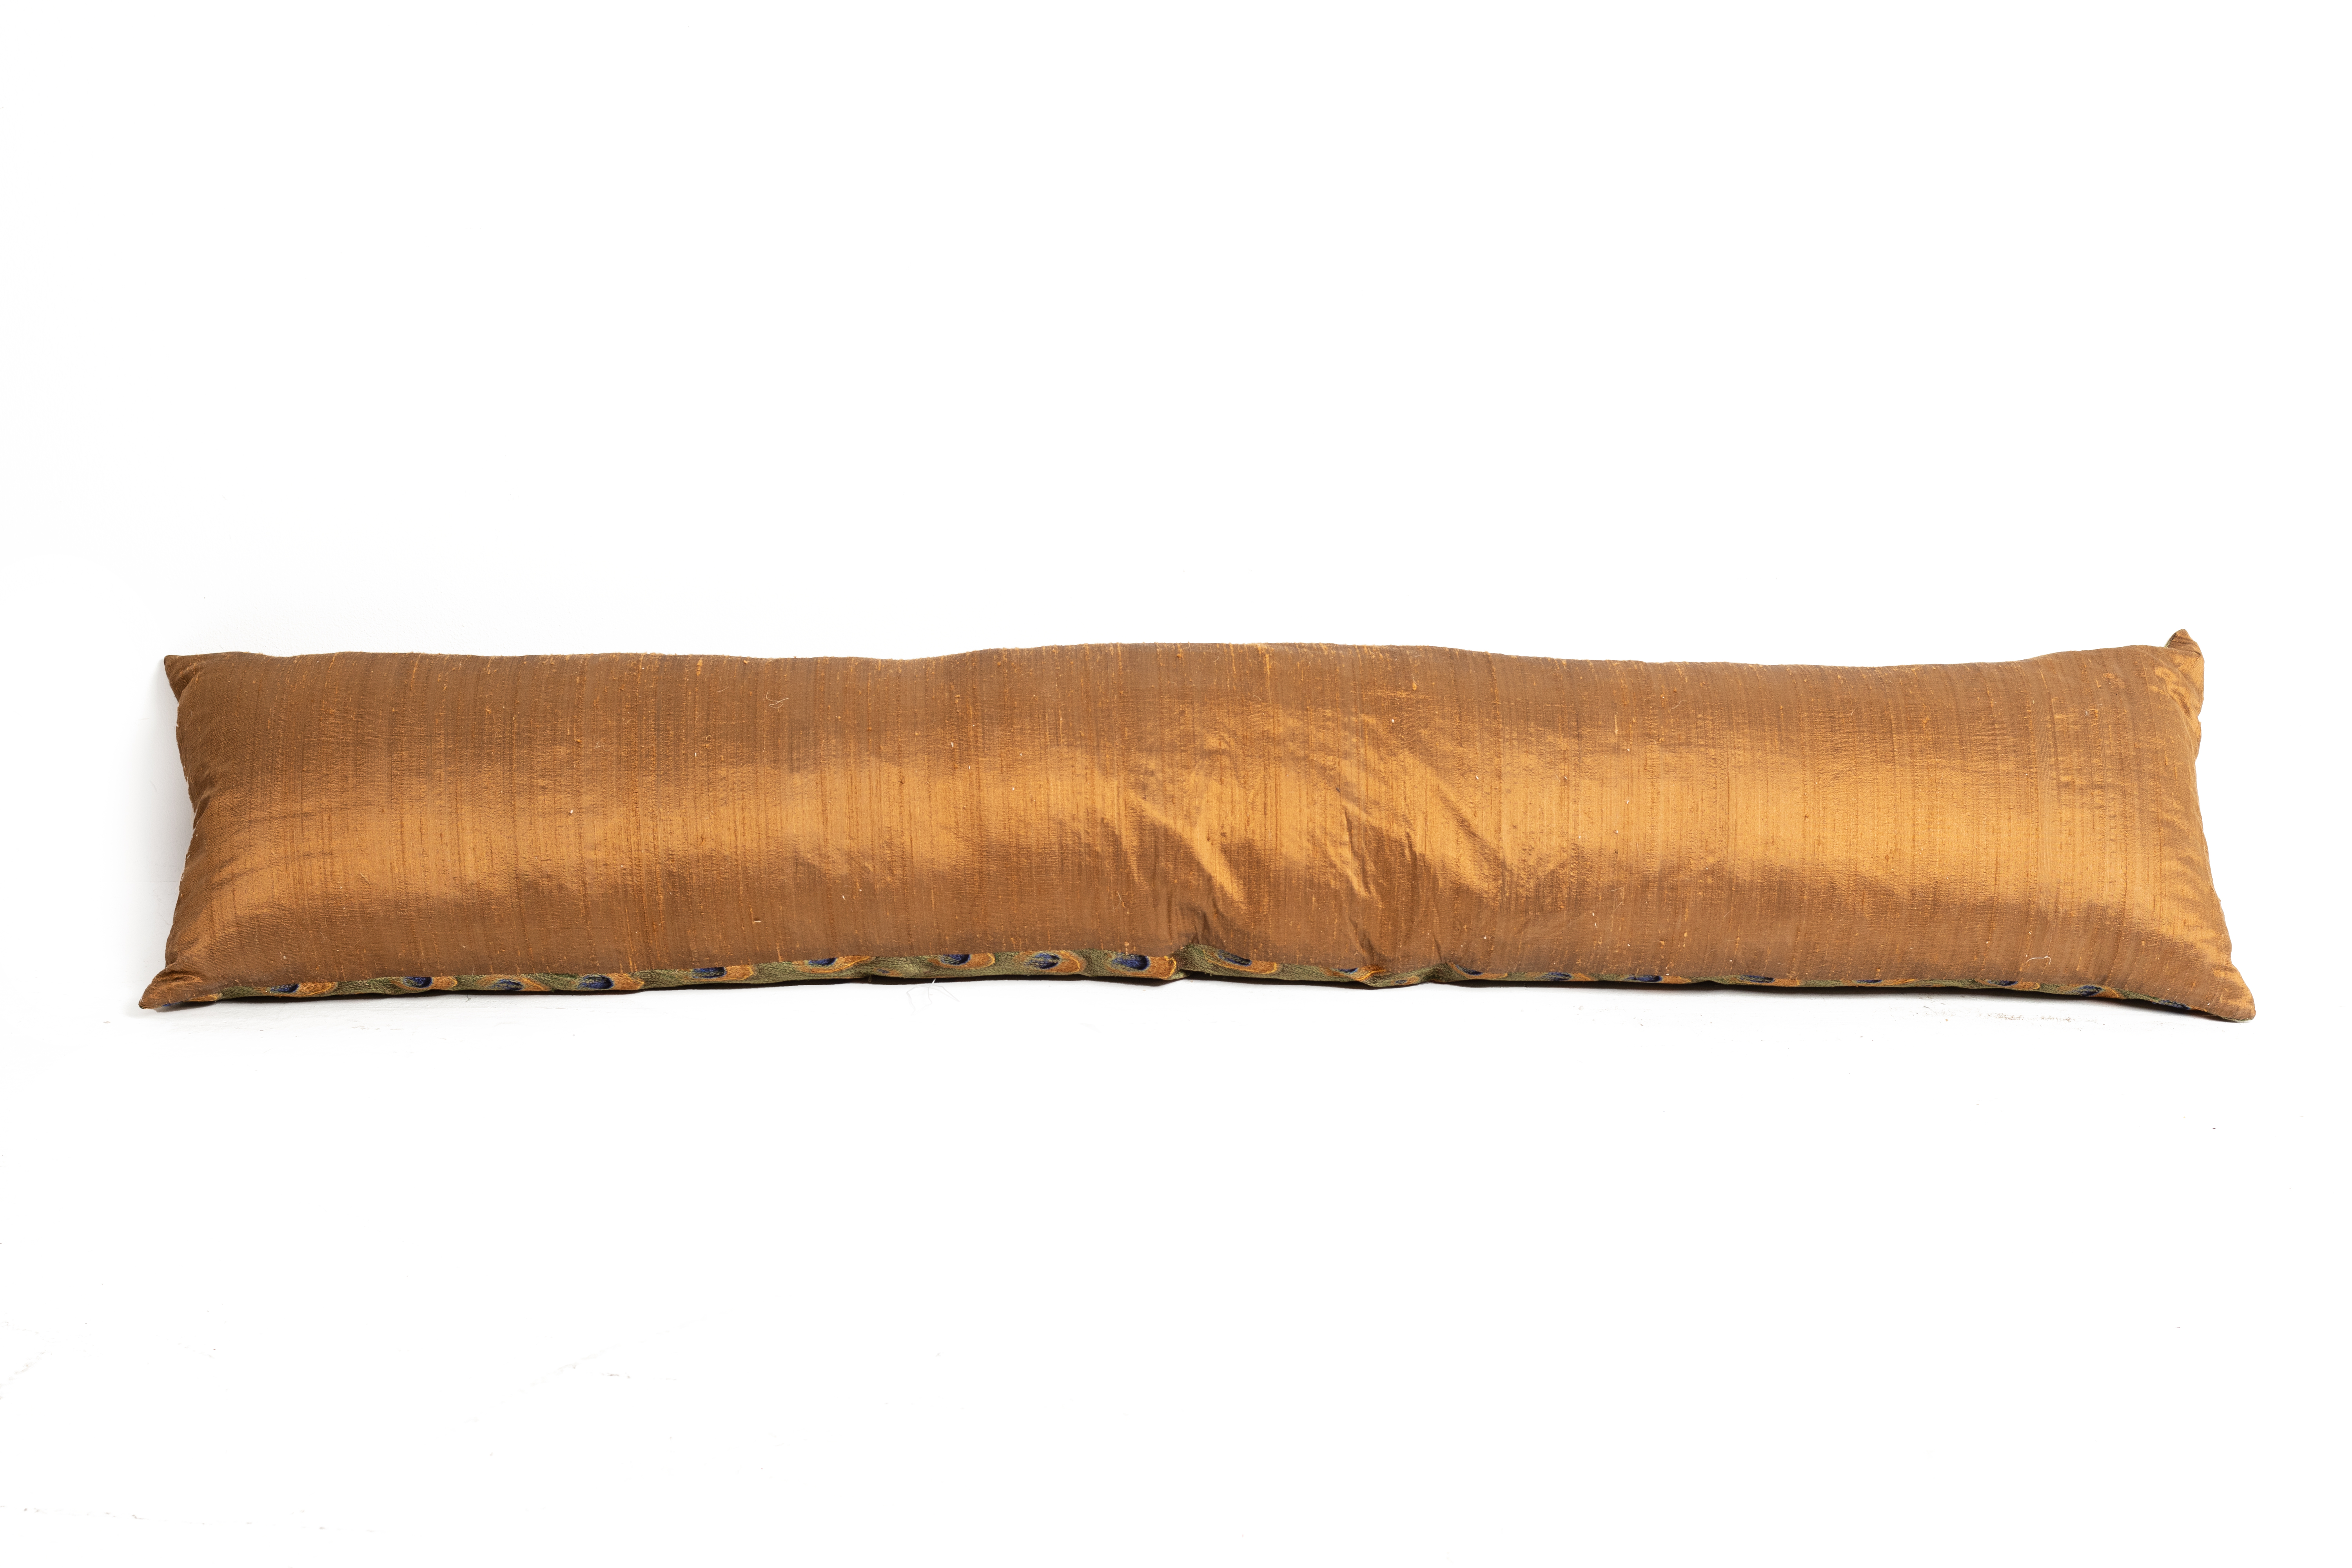 A PEACOCK FEATHER PATTERNED BOLSTER PILLOW - Image 3 of 3